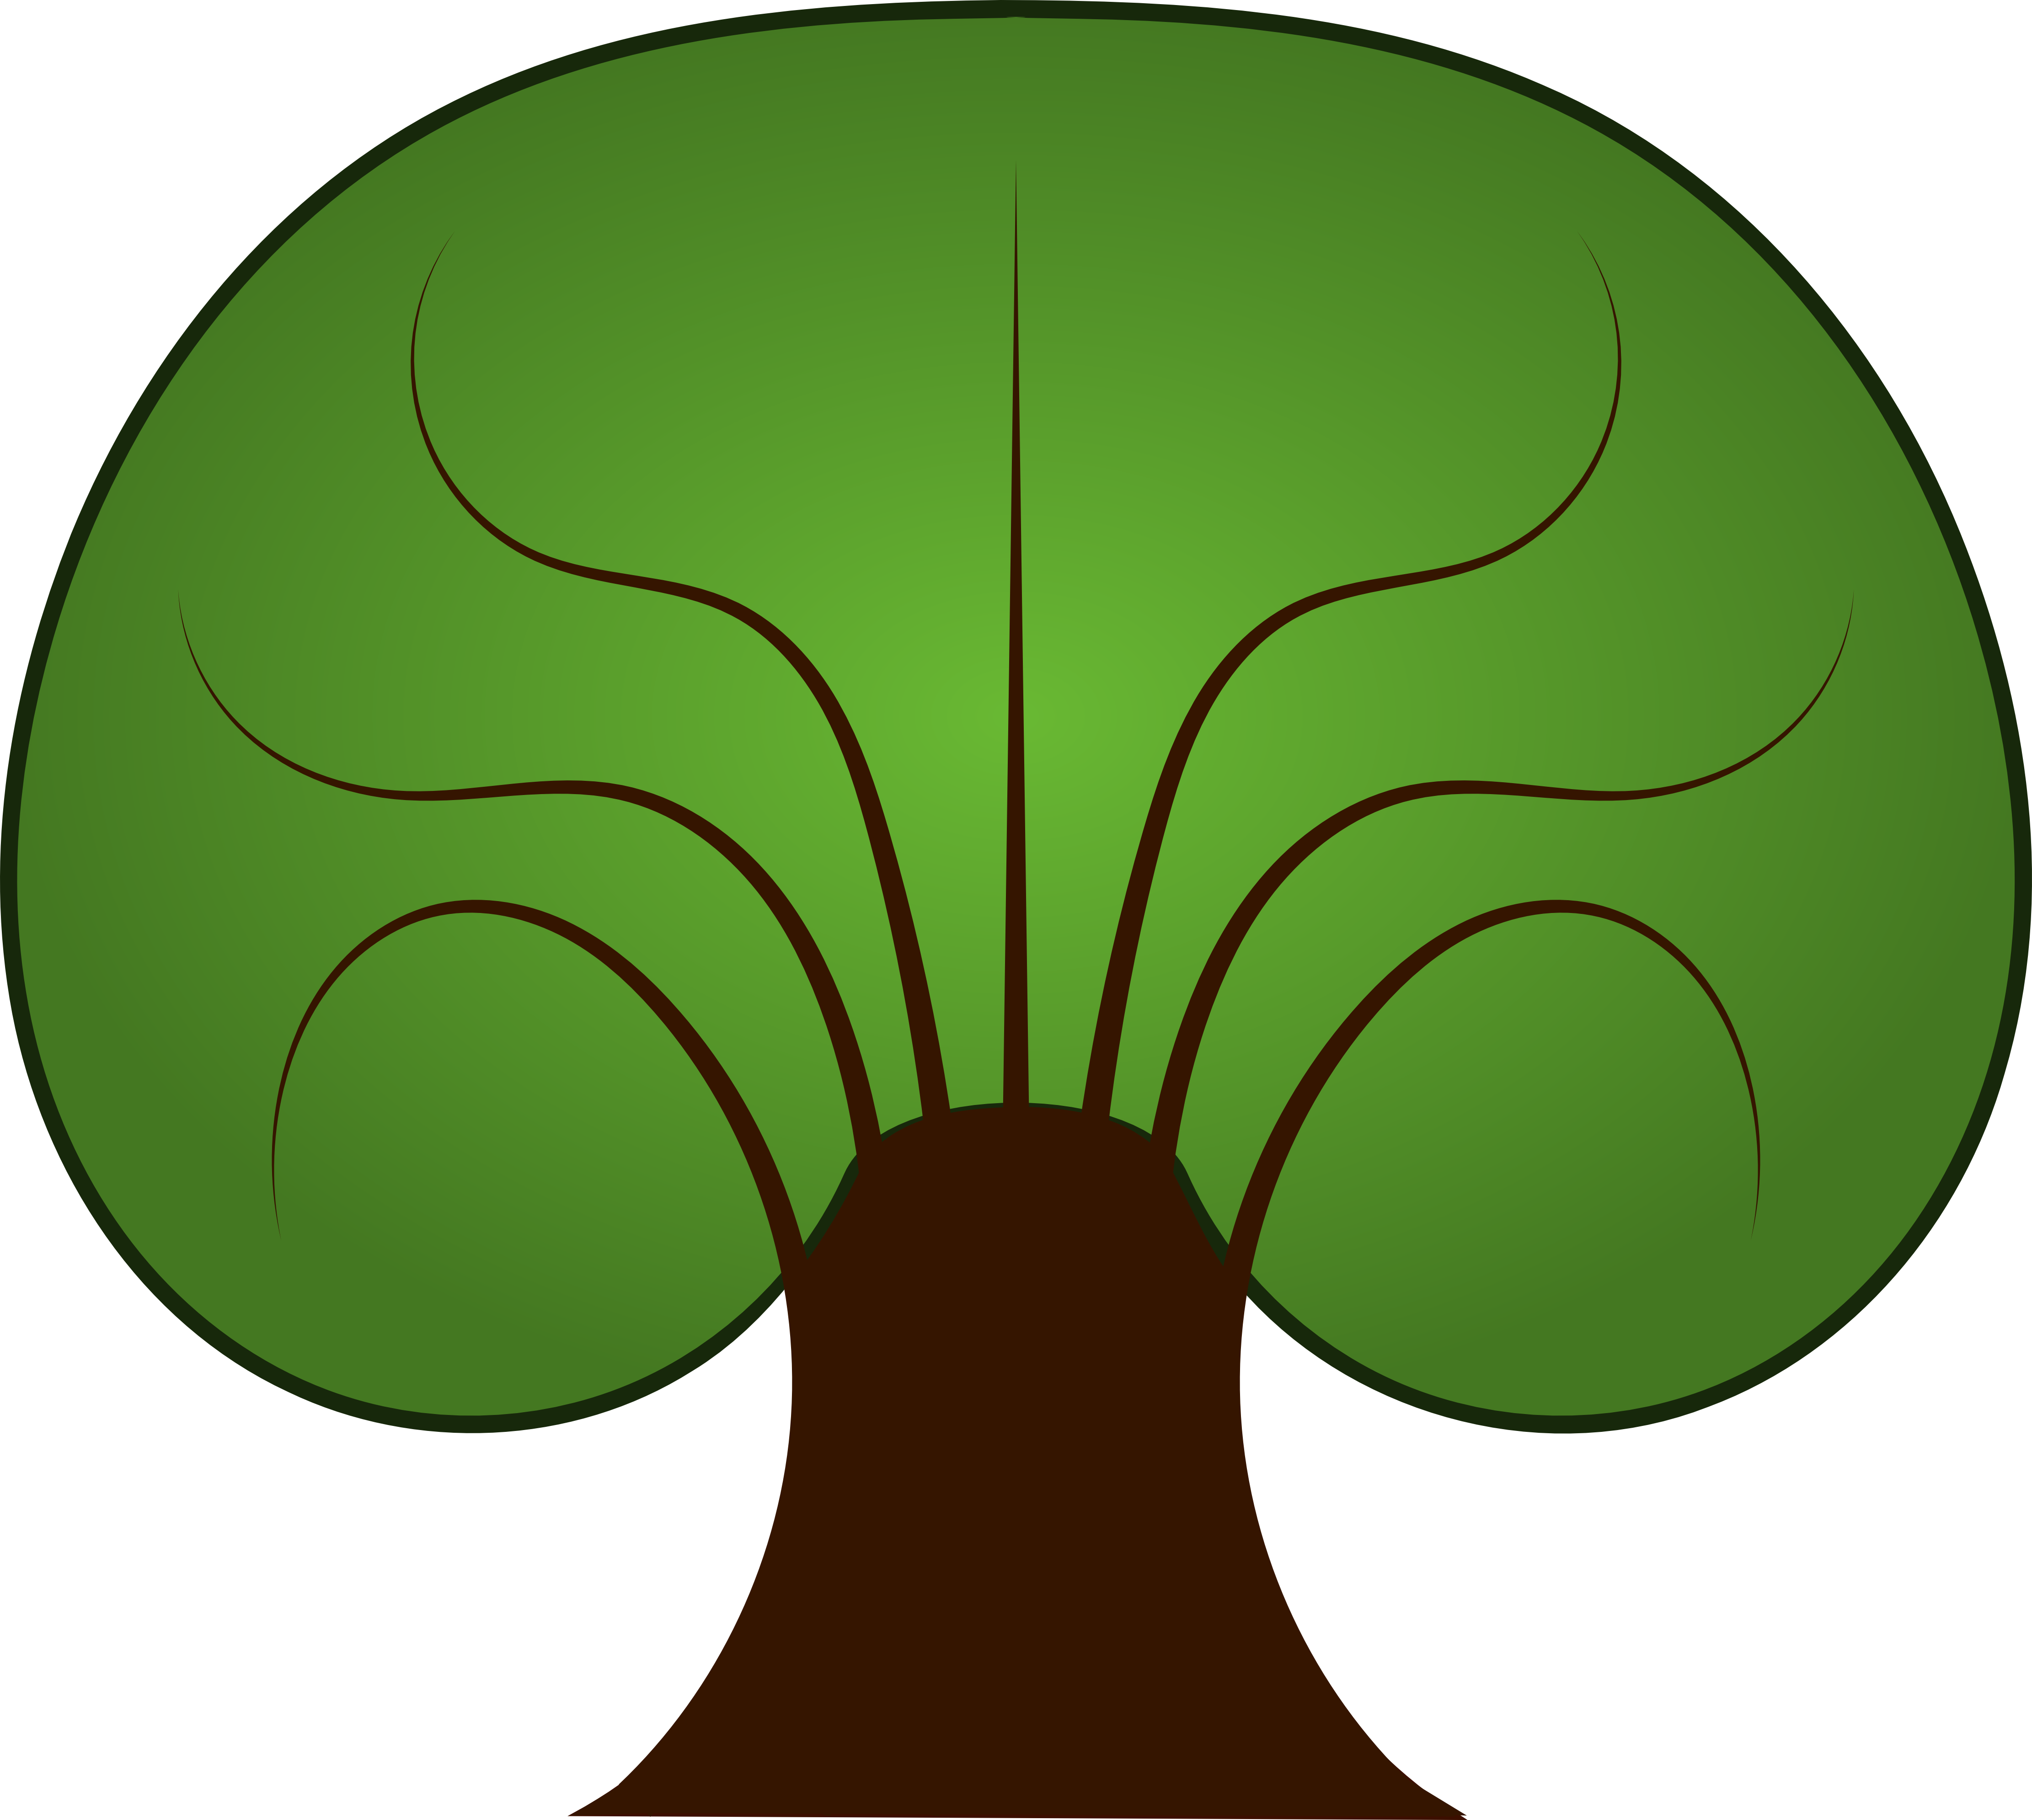 Tree clip art templates free clipart images